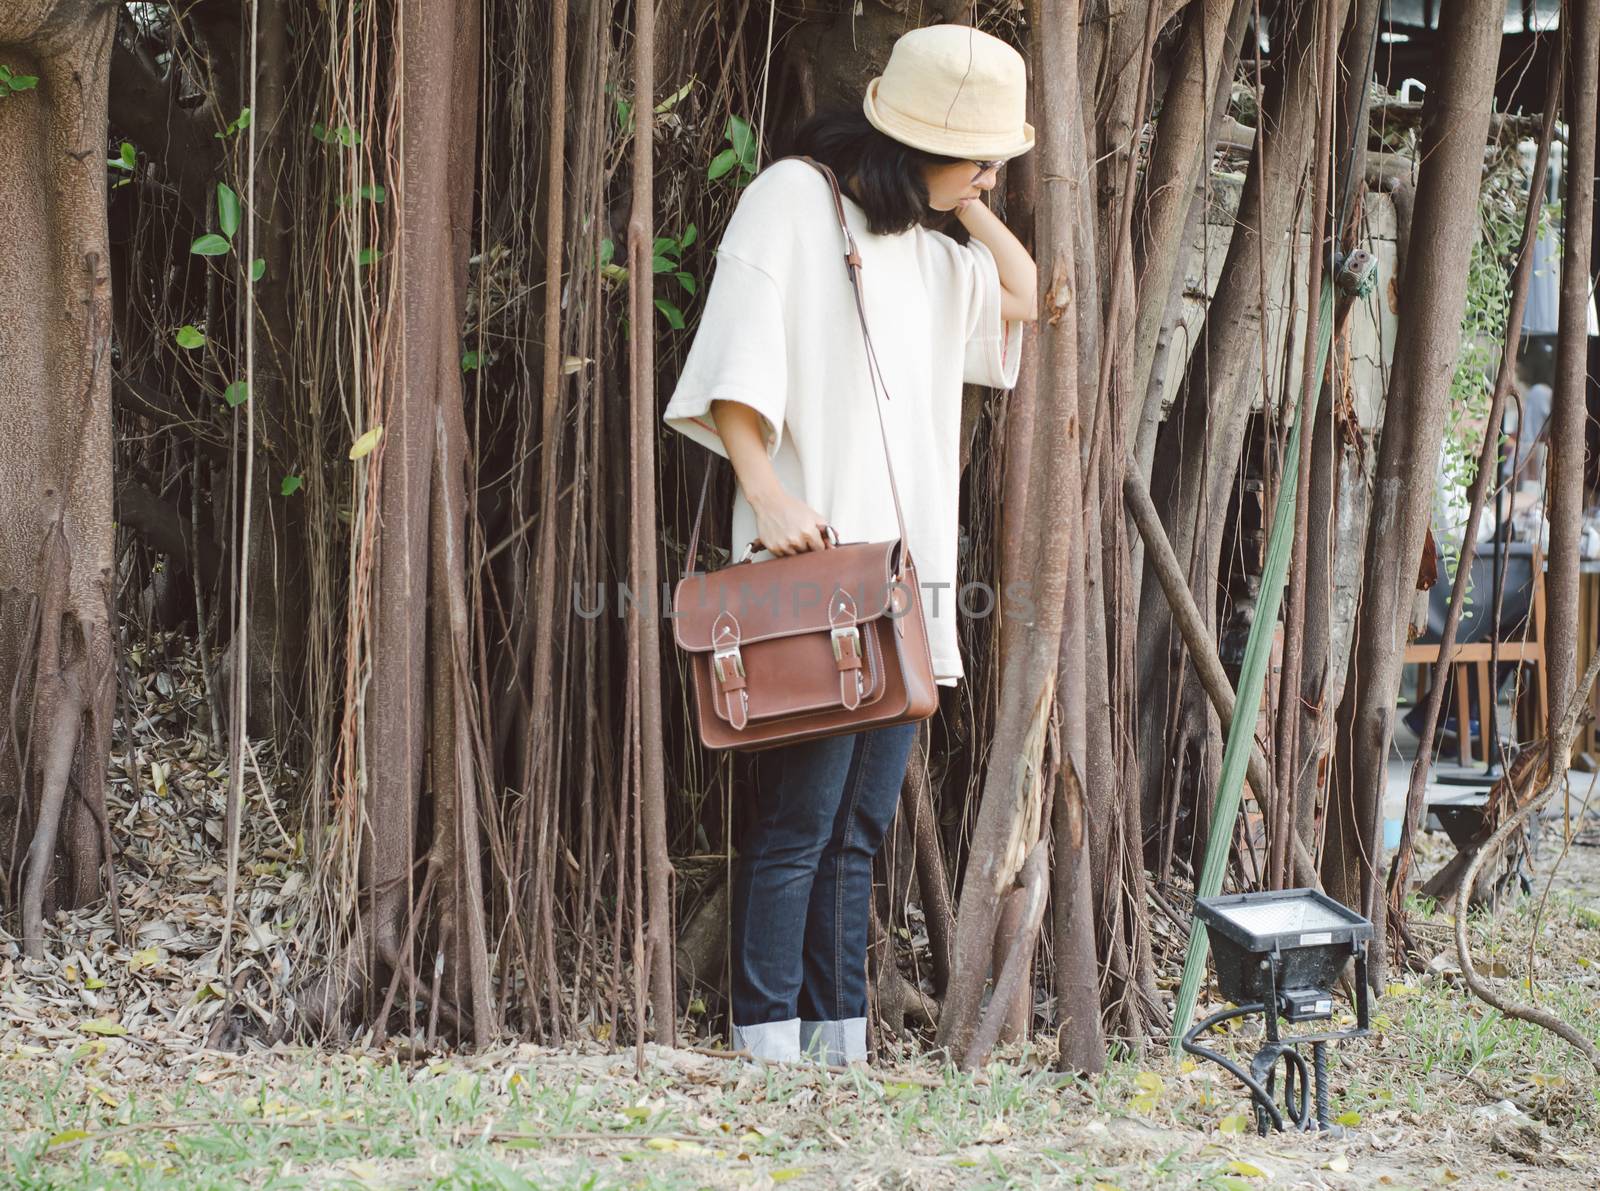 Fashion woman with vintage leather bag on nature background, retro filter